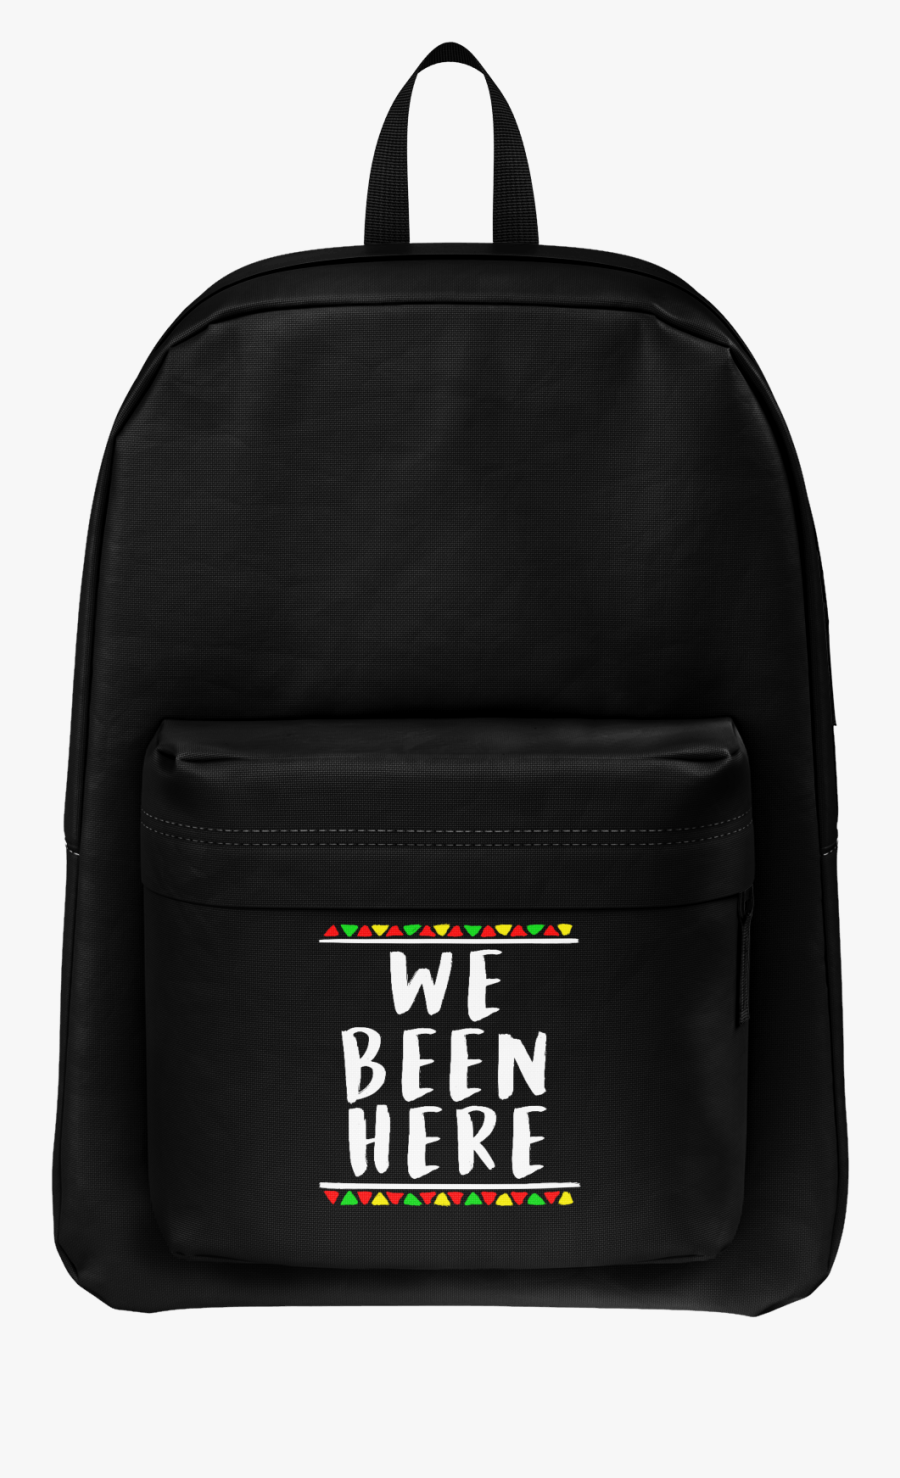 Bags Clipart Backpack Lunch Box H2o Delirious Merch Bookbag Free Transparent Clipart Clipartkey